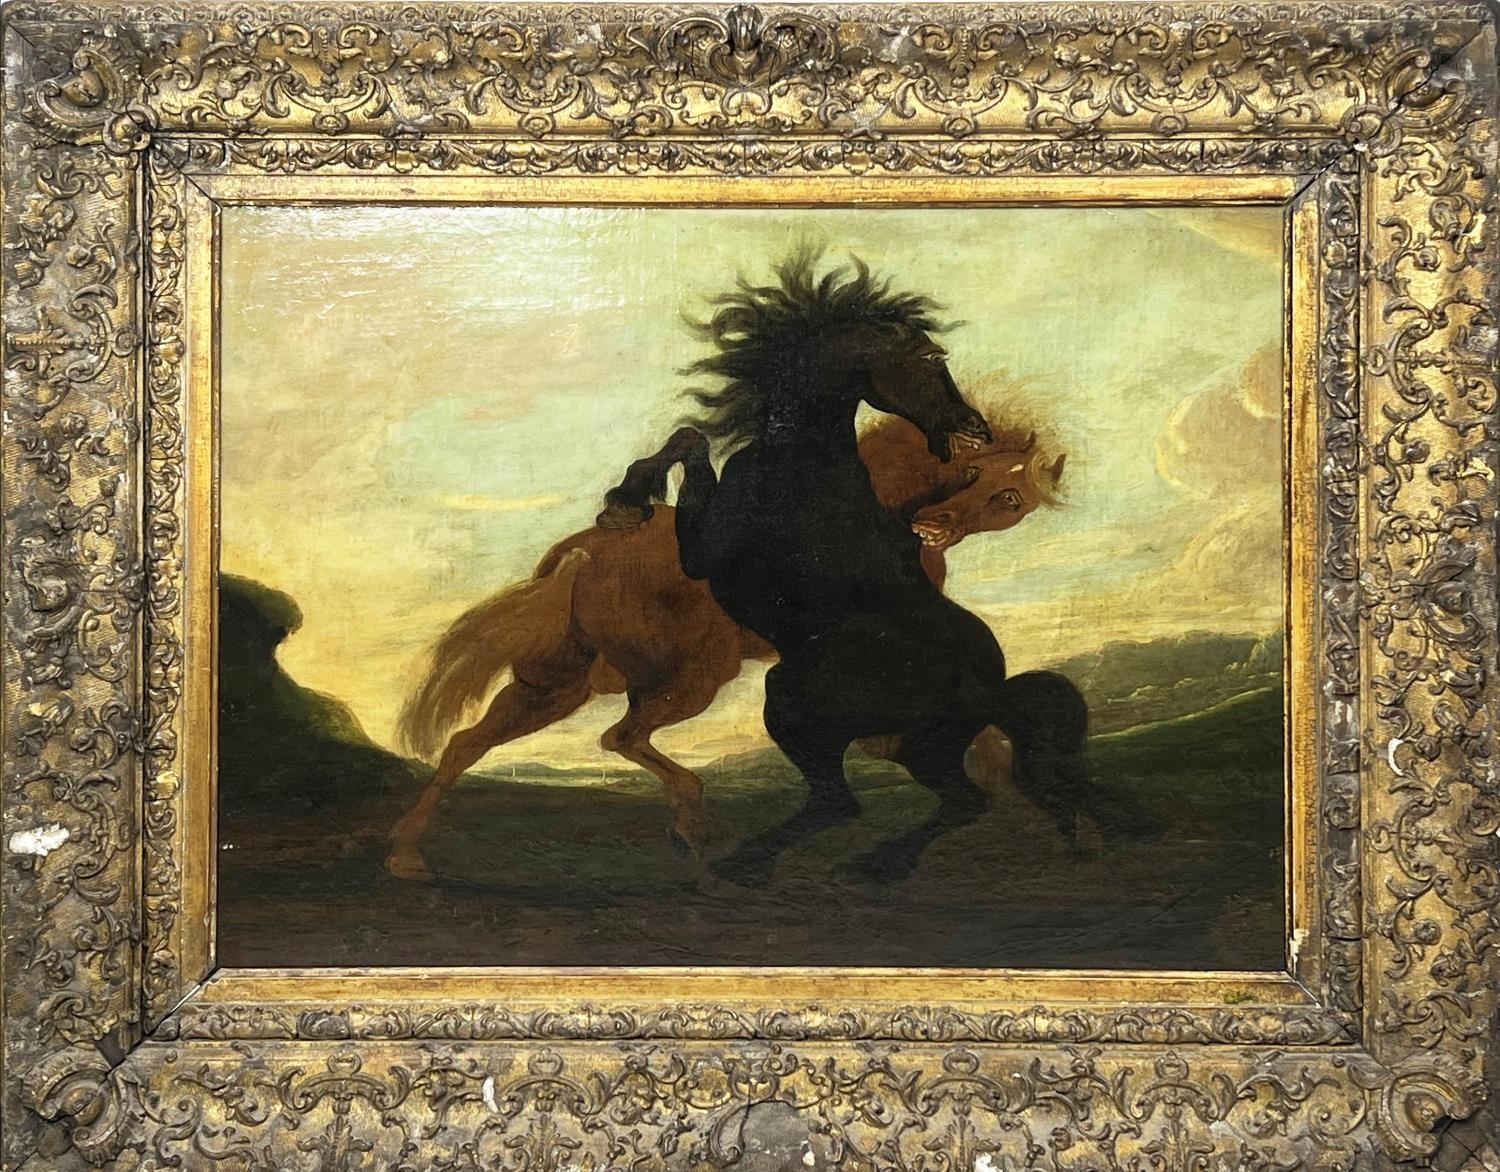 MANNER OF EUGENE DELACROIX (French 1798-1863) 'Fighting Stallions', 19th century, oil on canvas,